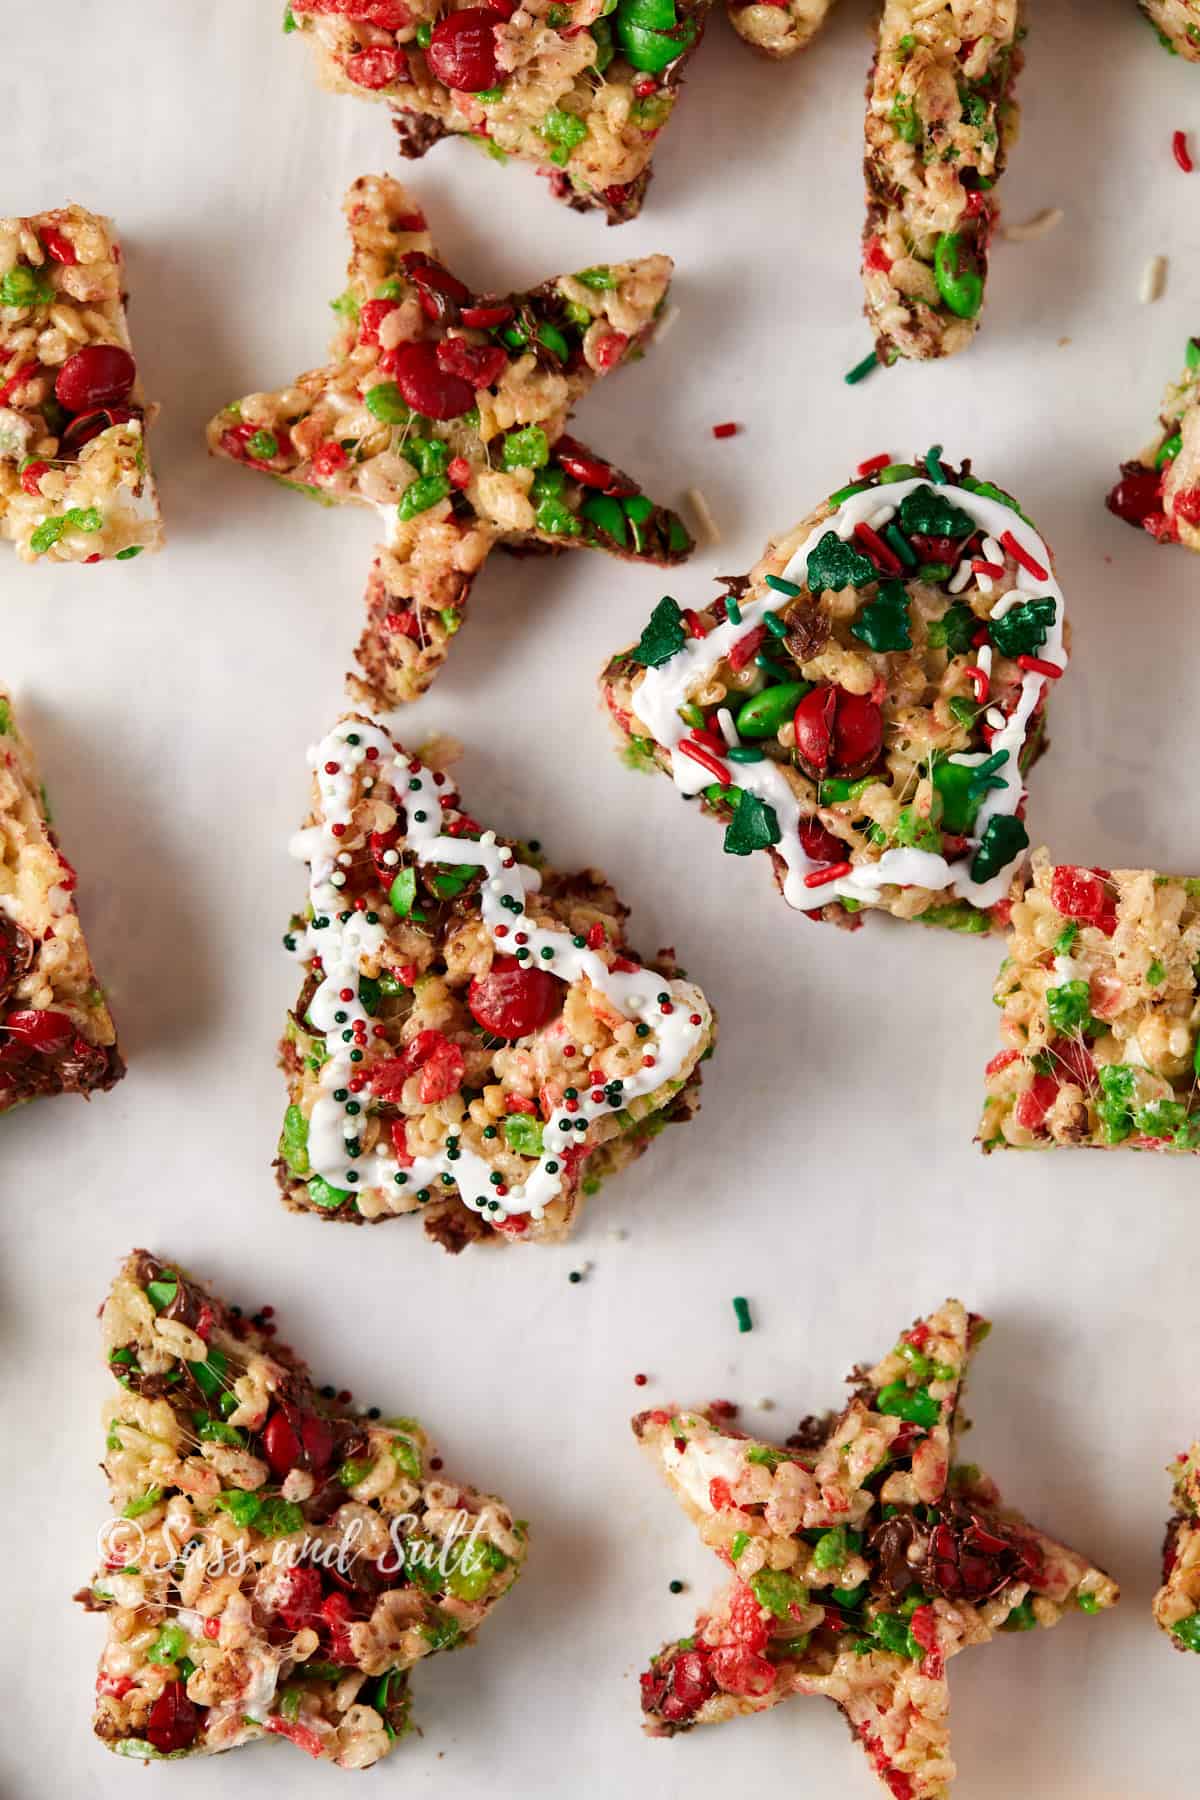 Overhead view of Christmas Rice Krispie shaped into Christmas cut outs.